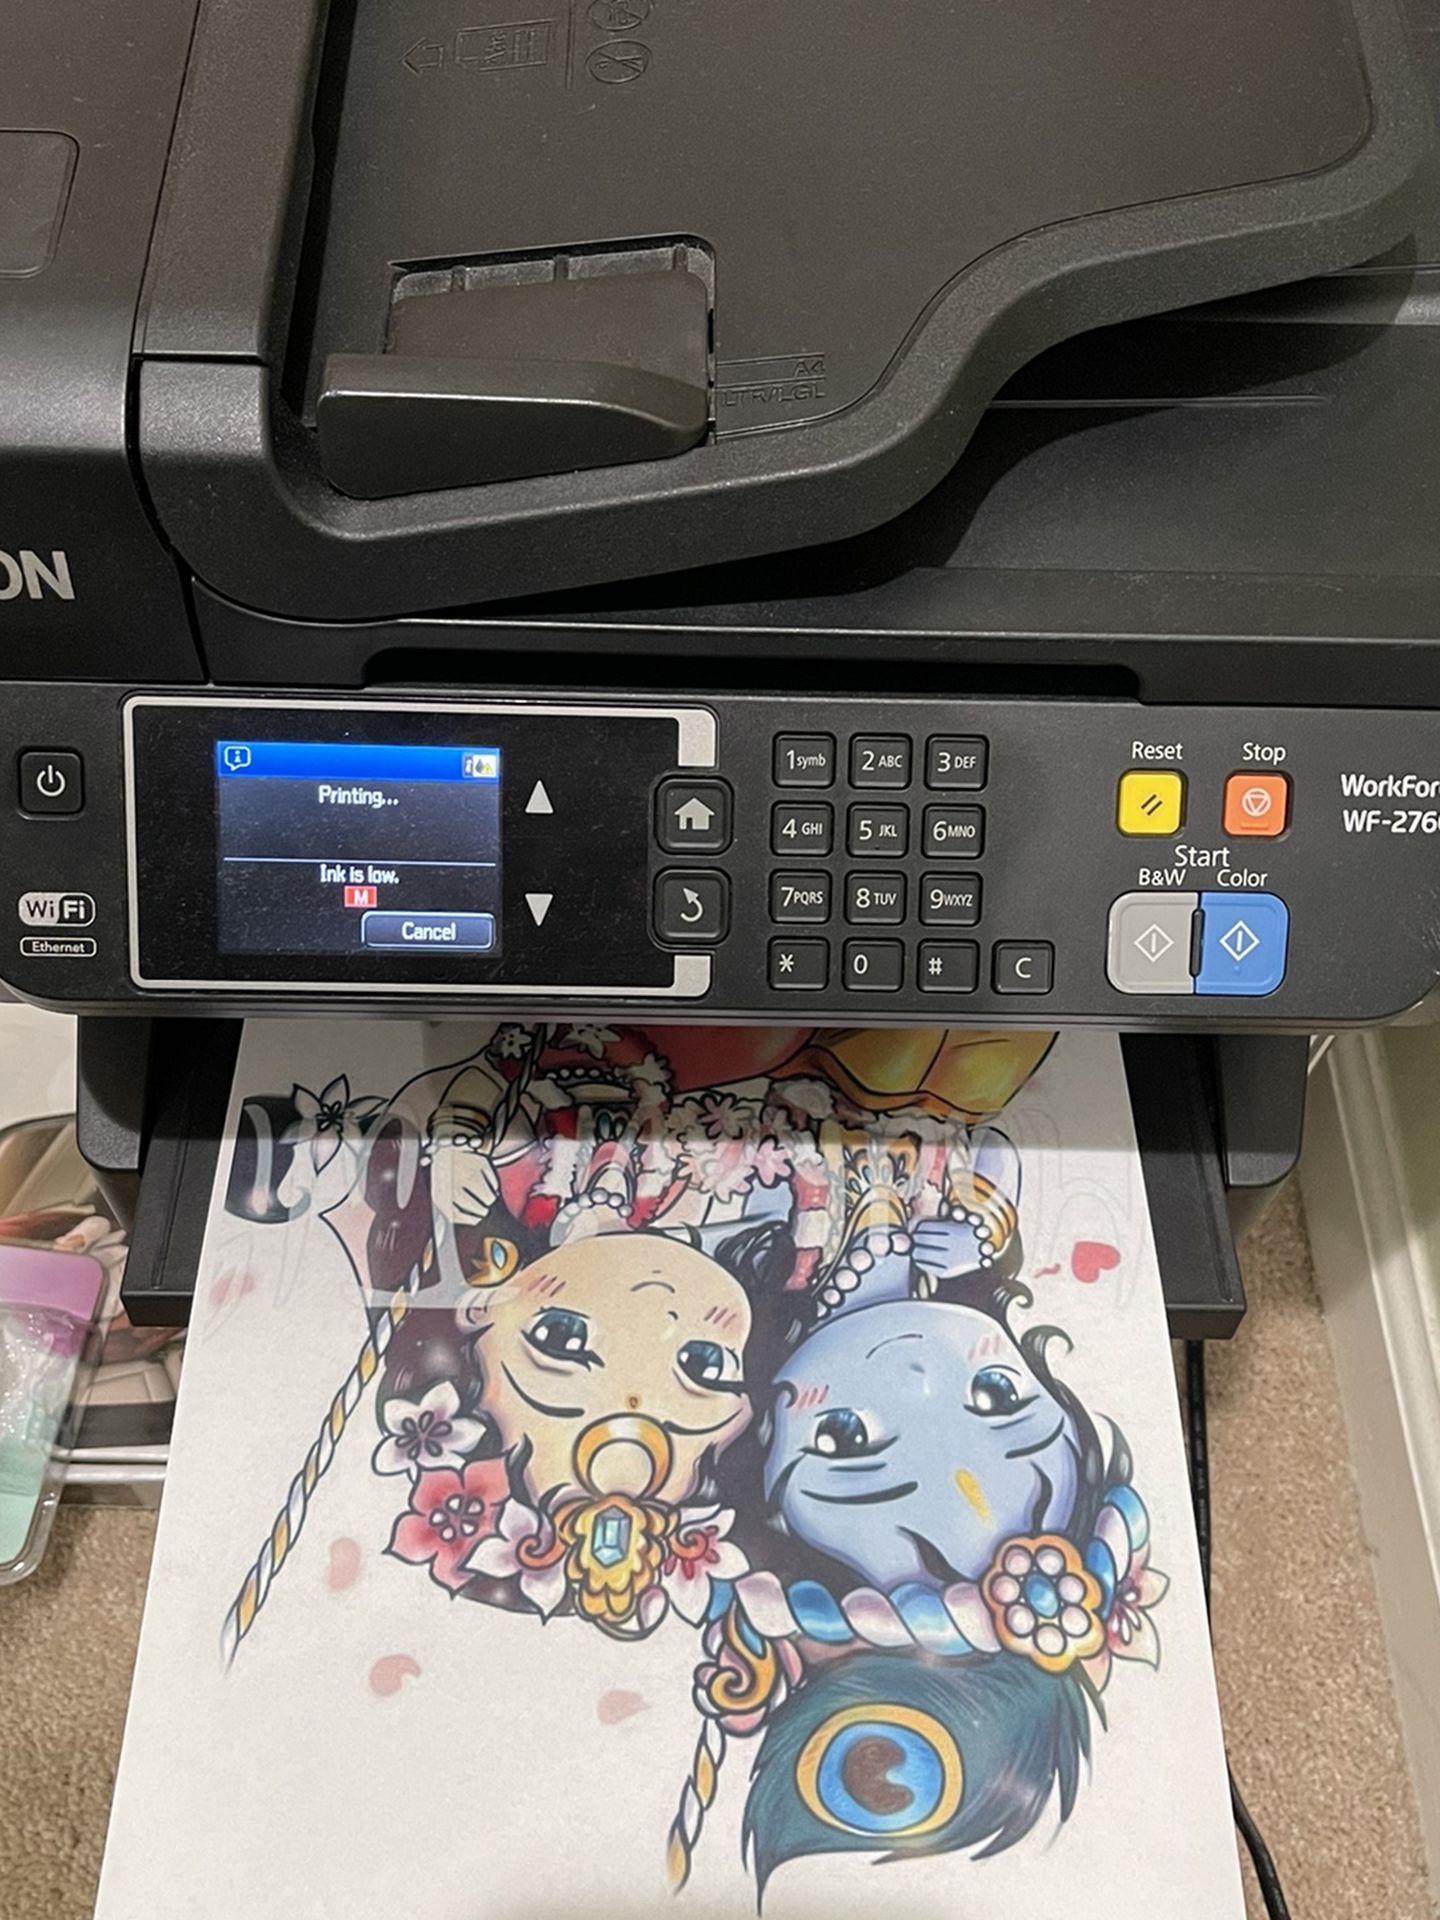 All-in-one Epson color Printer